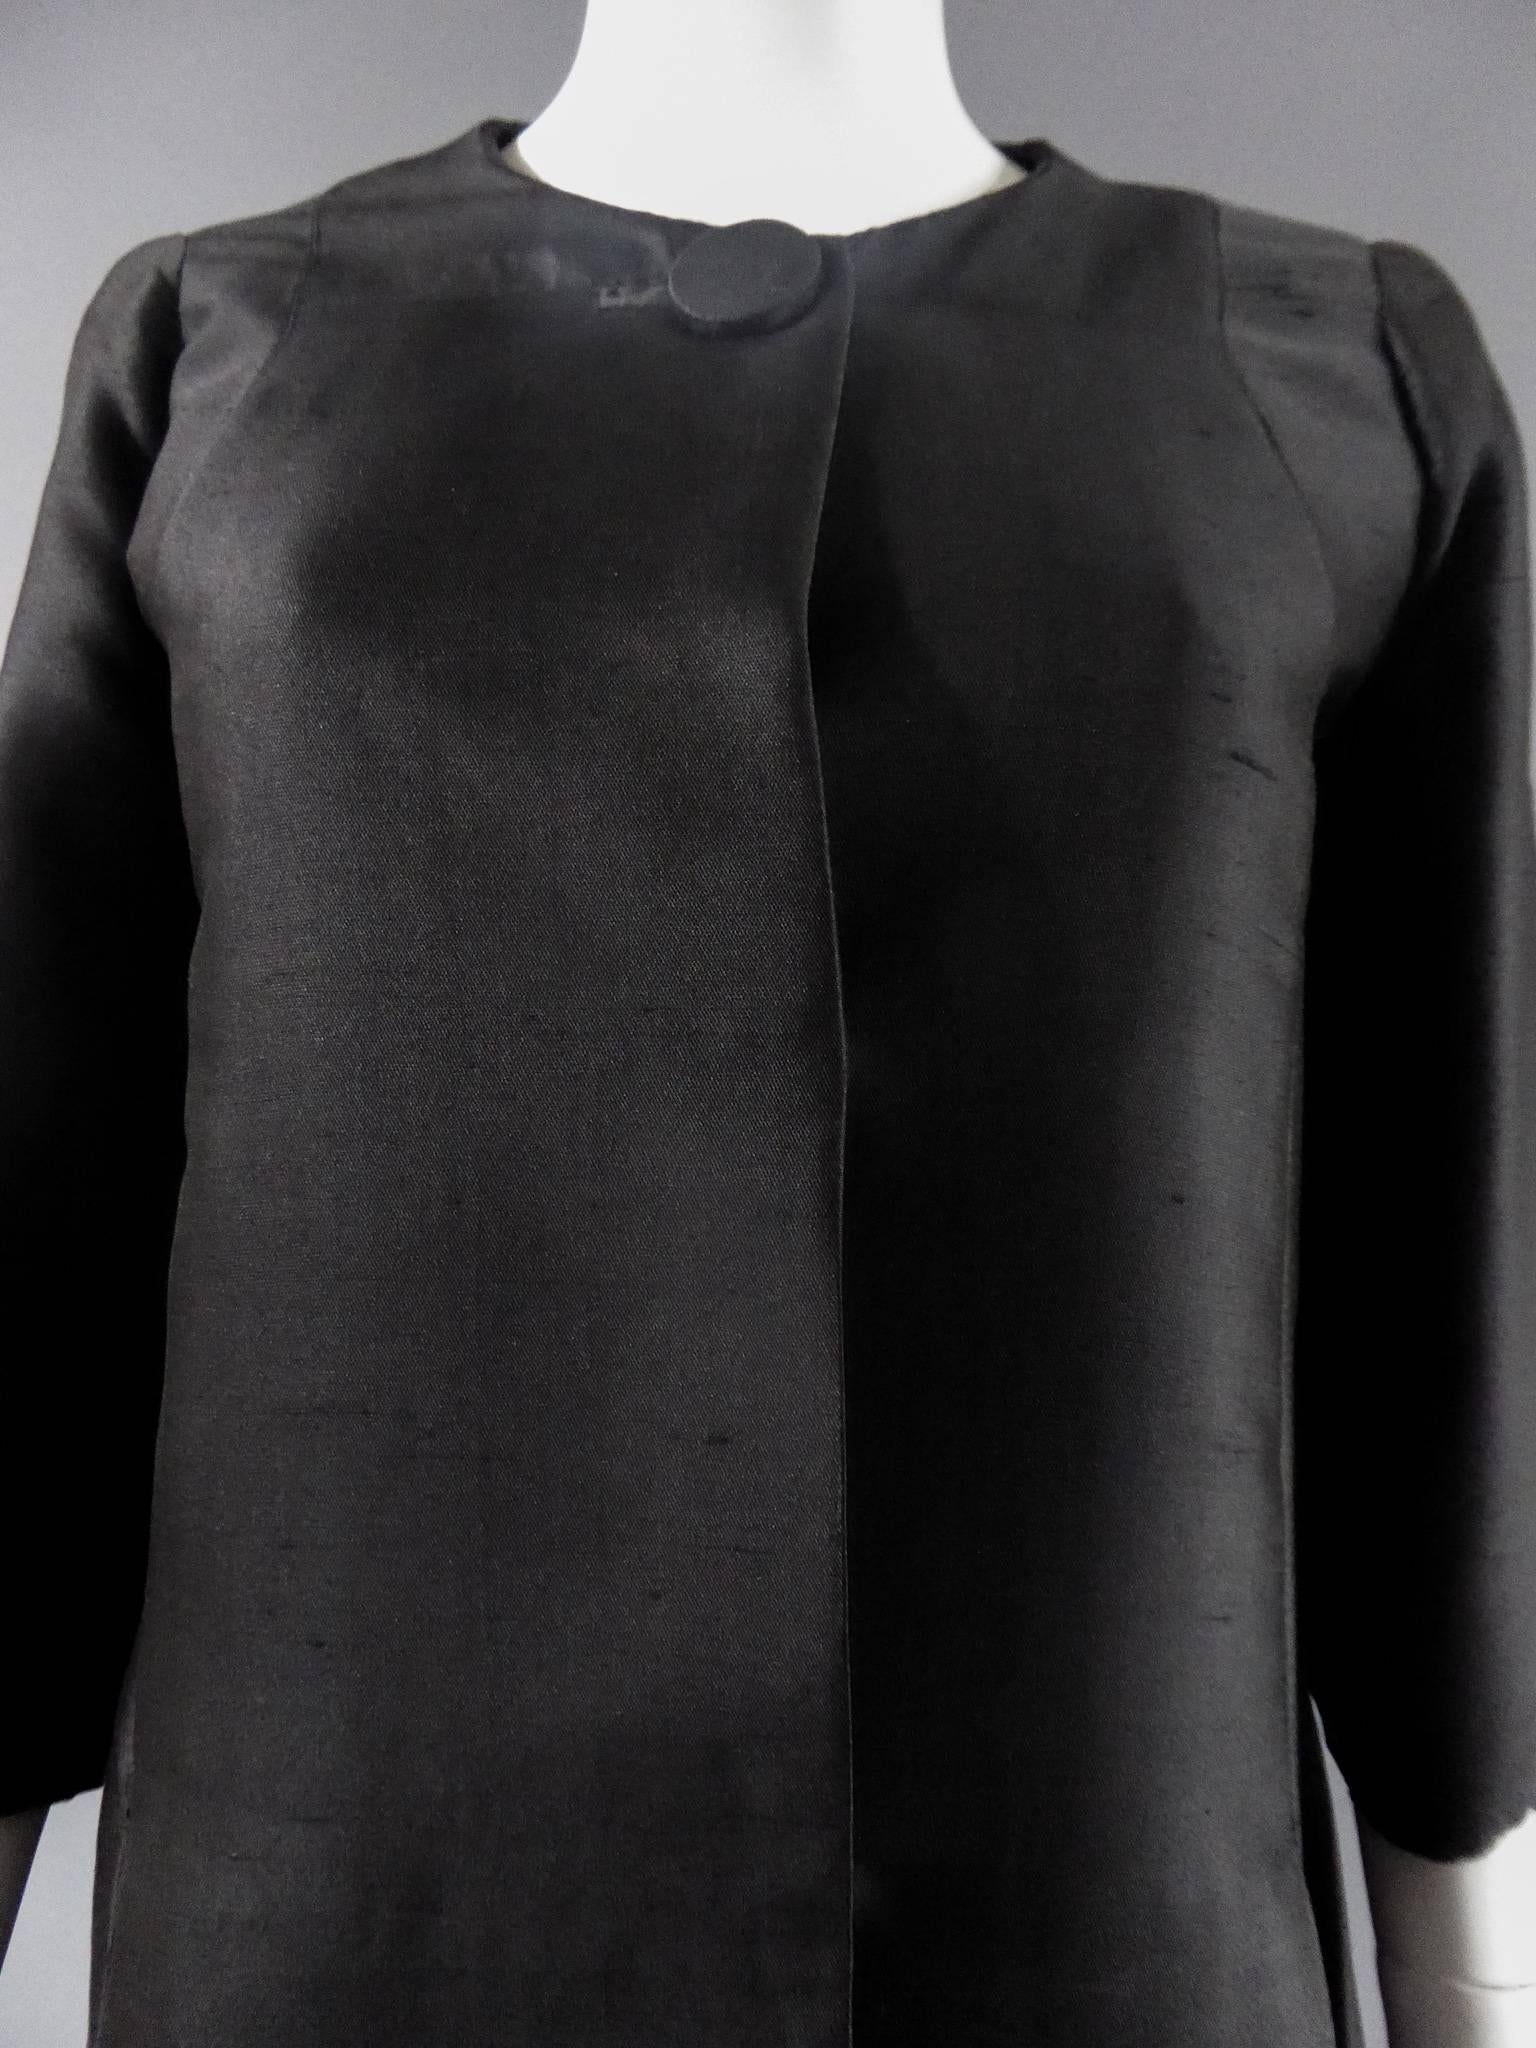 Circa 1950

France

Haute couture coat late 50s by Jean Dessès in shiny black shantung silk. Cut in the continuity of the 1960s trapezoidal line. Two folded bellows under the two side pockets. Button fastening similar to the collar and two snaps.